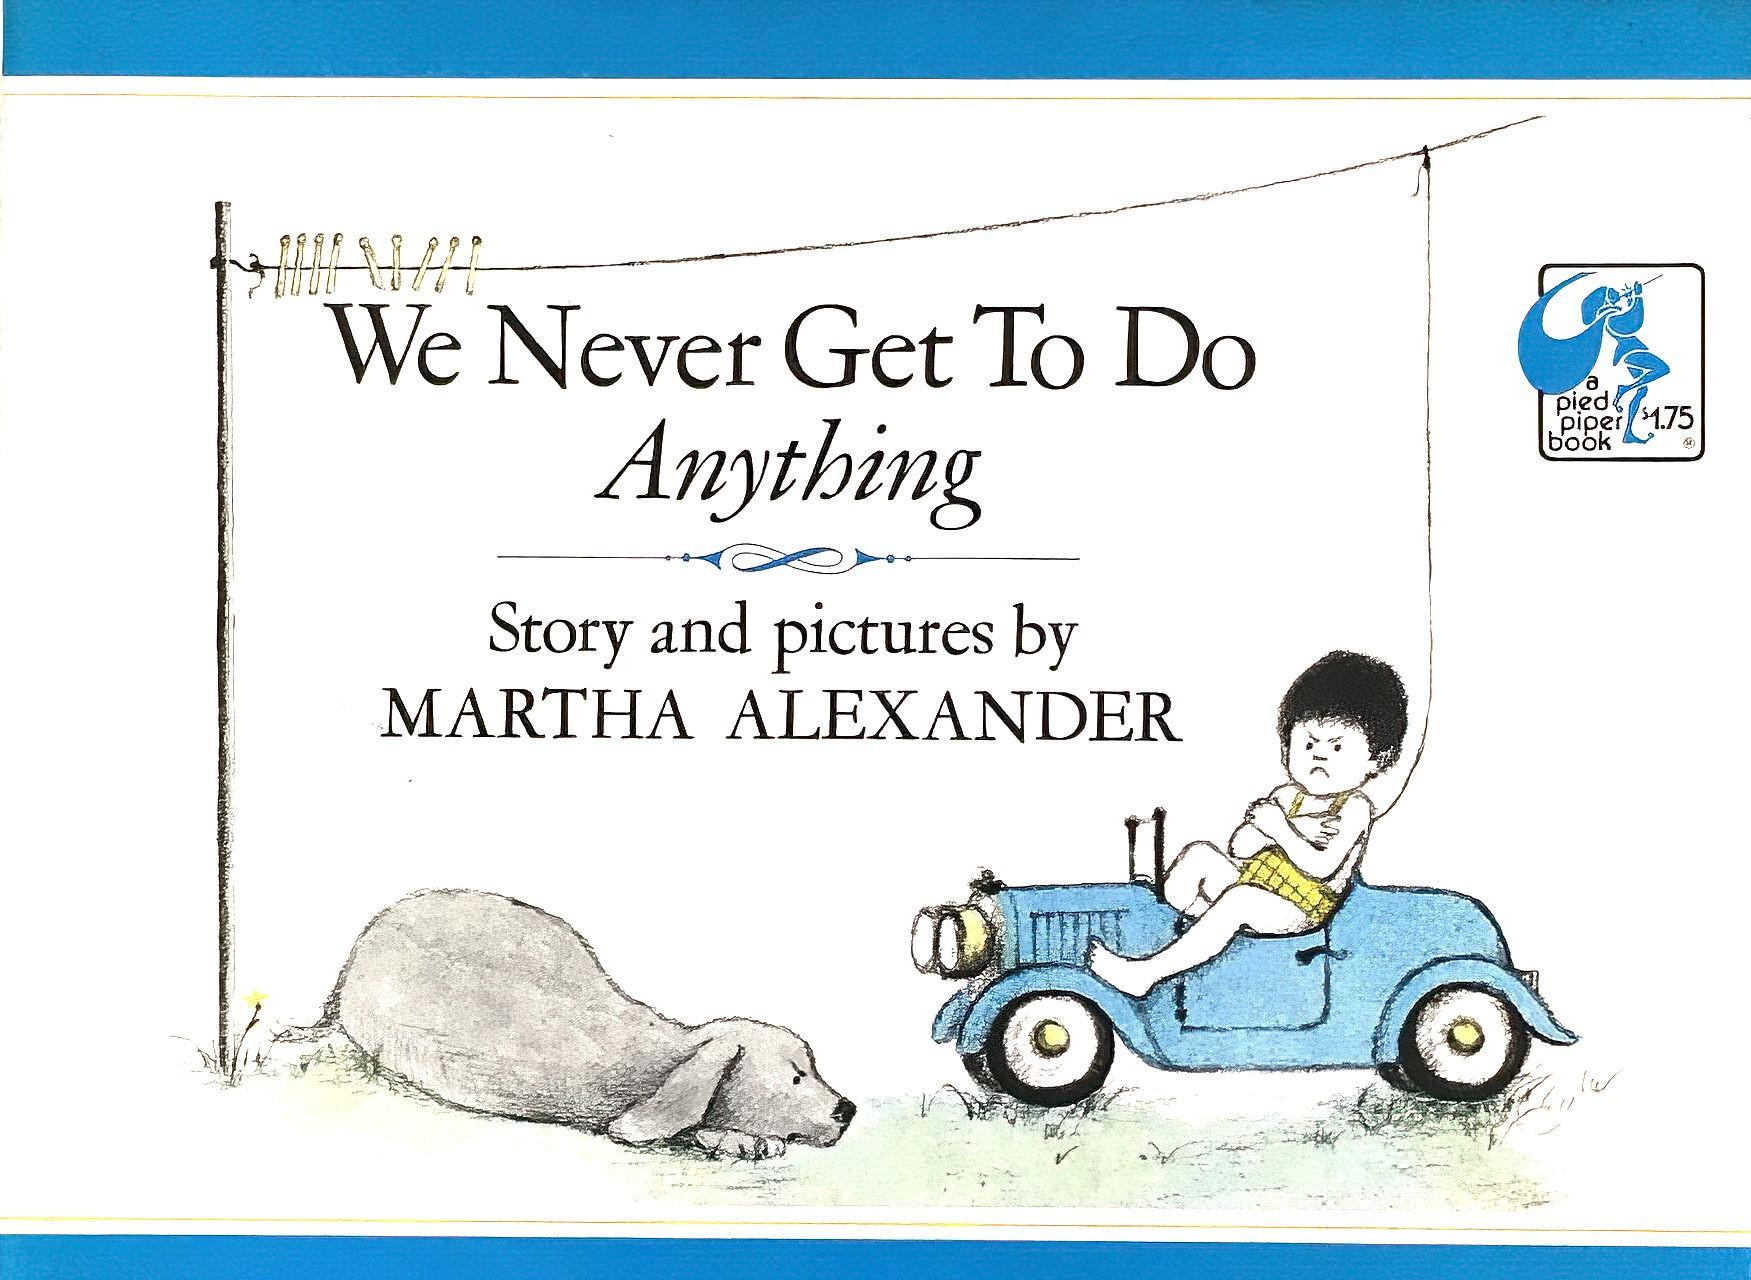 We Never Get To Do Anything by Martha Alexander 1970